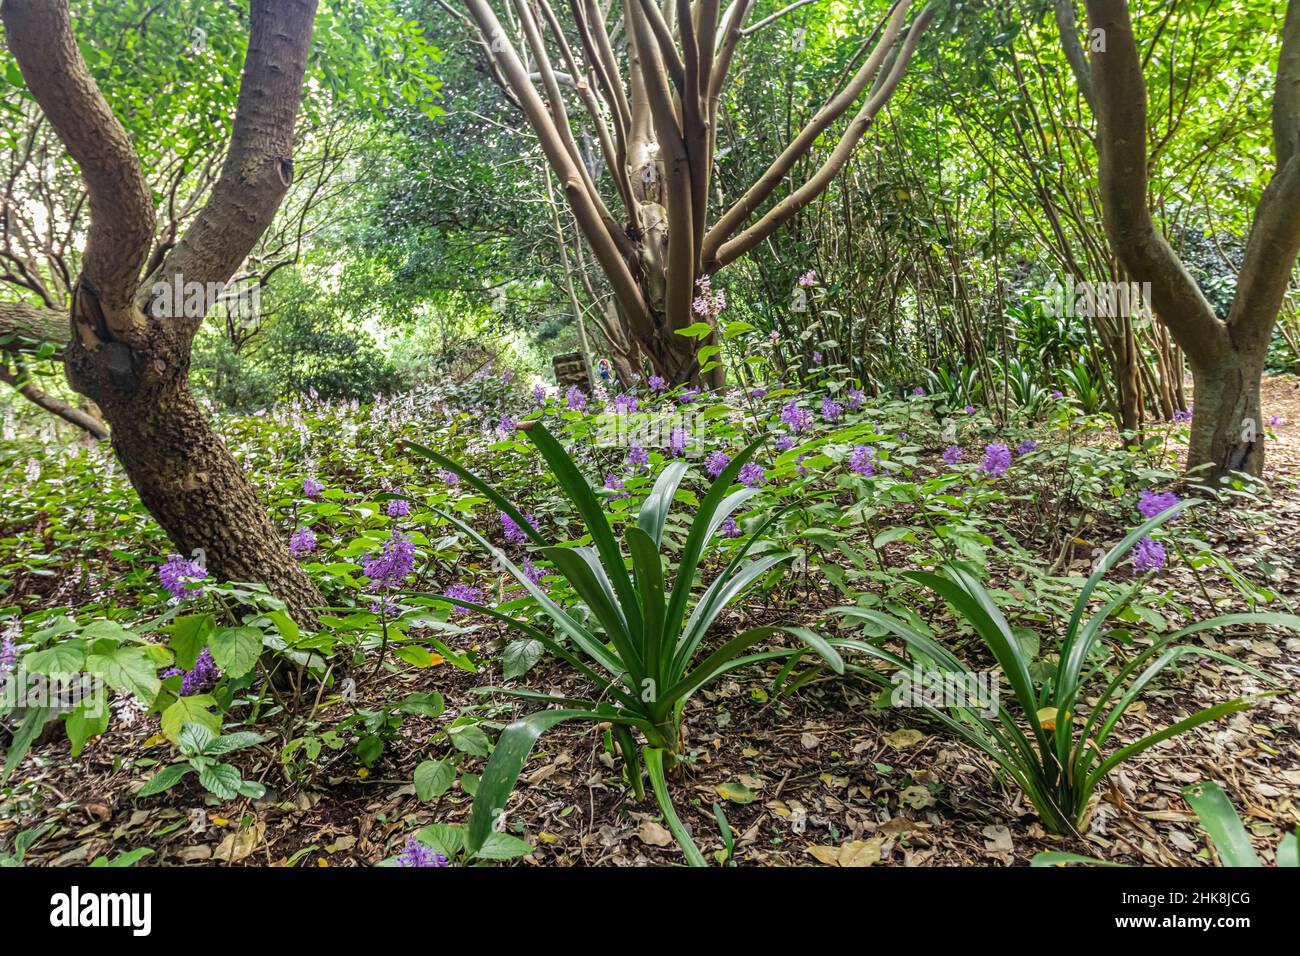 Native flowering vegetation and plants at Kirstenbosch National Botanical Garden in Cape Town, South Africa. Stock Photo